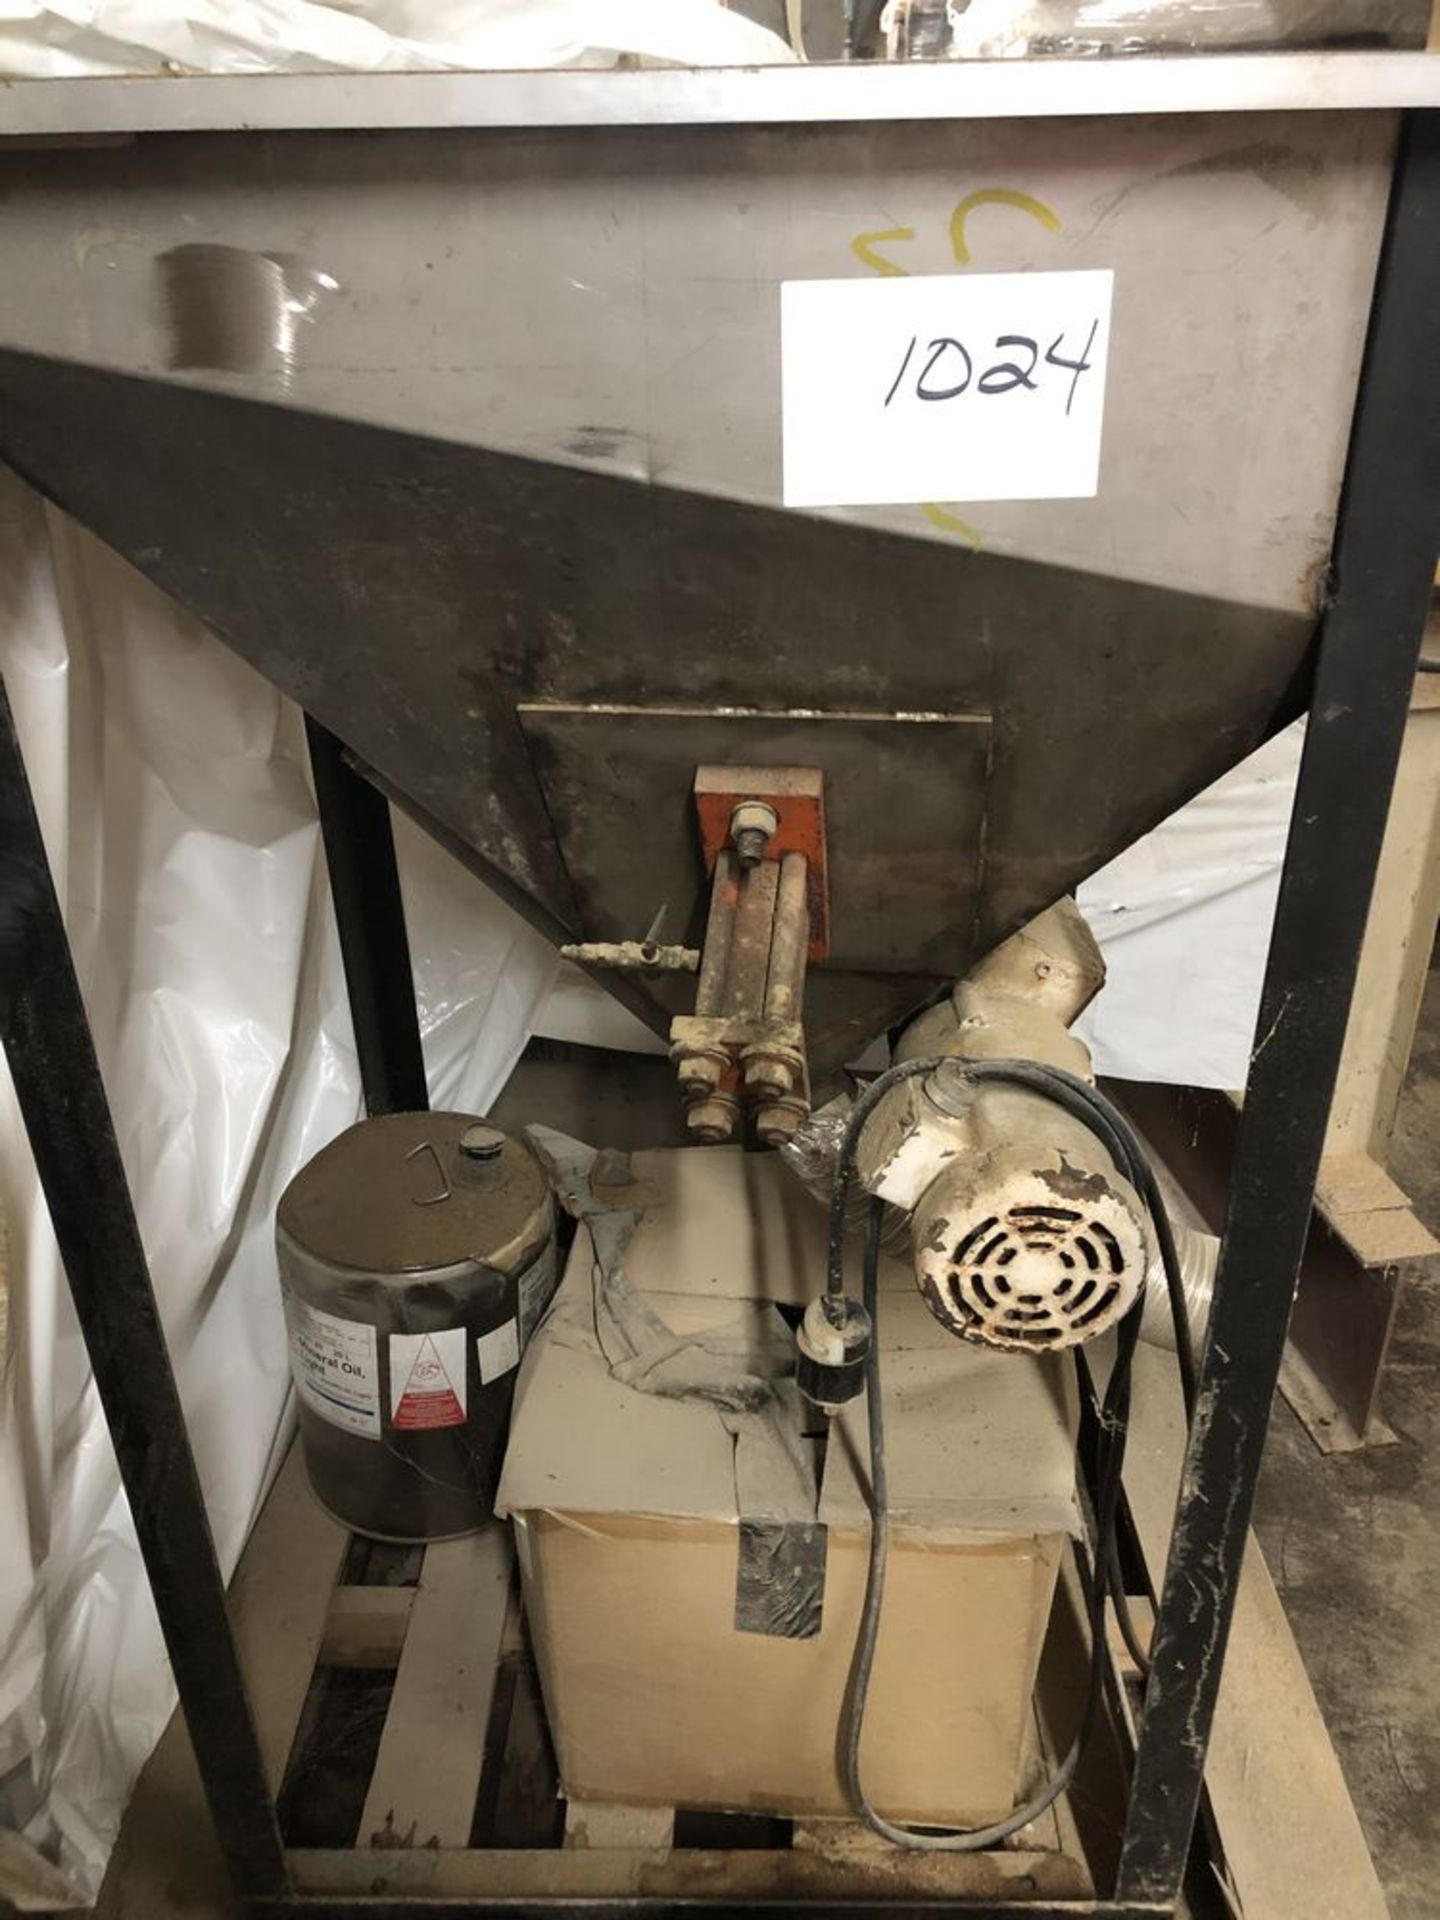 Located in Rockford, IL : Bulk Powder Infeed Hopper with vibrator and 4" connection for auger